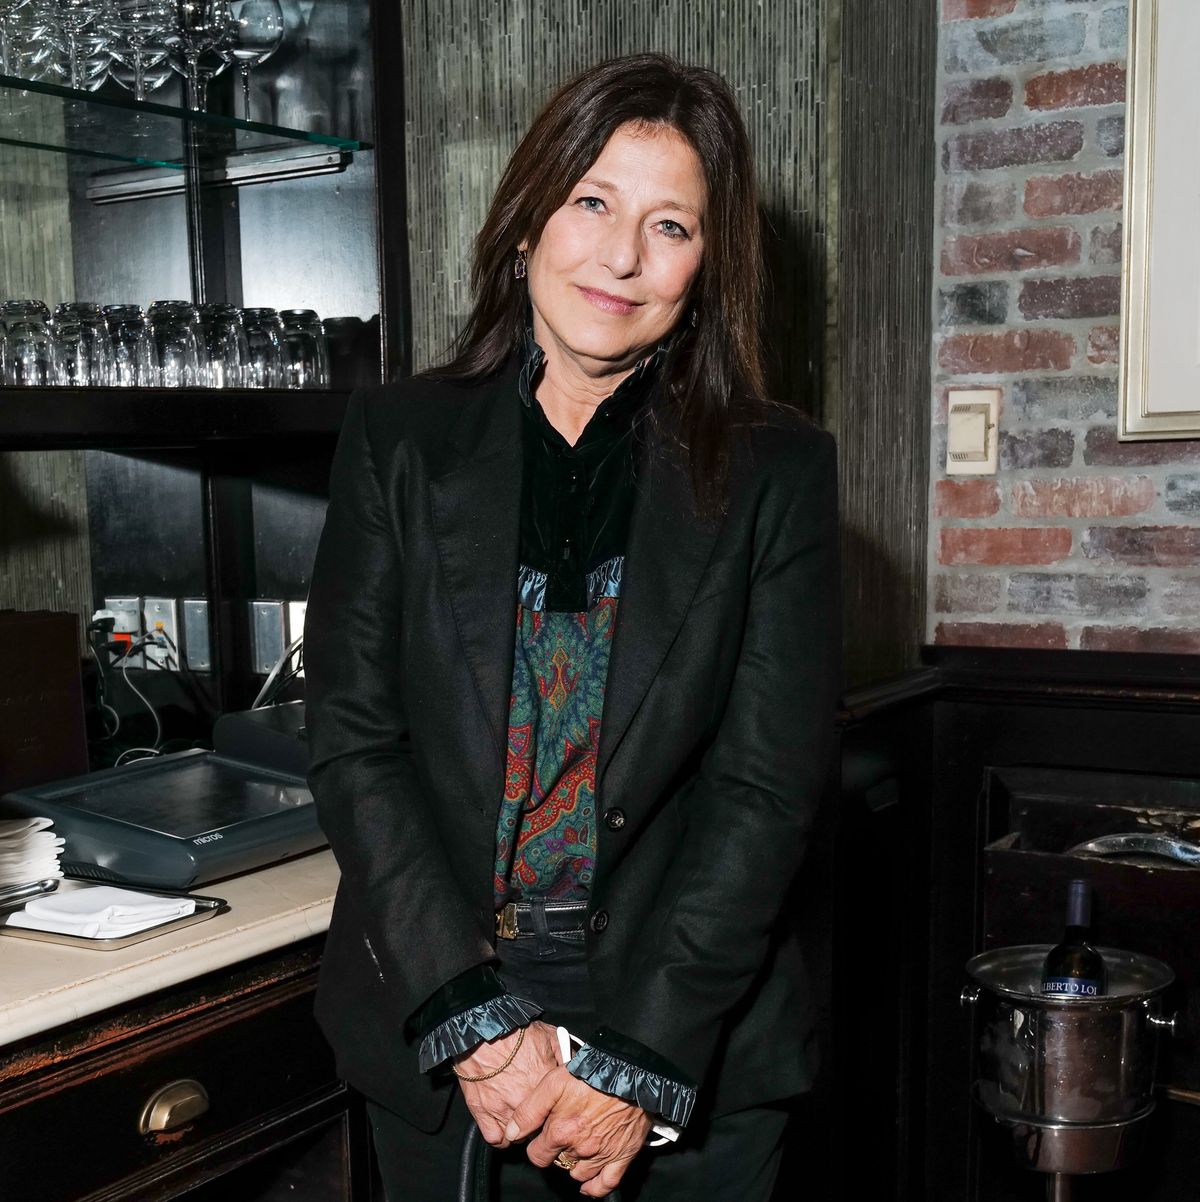 Girls Keener Xxx Video - Catherine Keener on Protesting with Jane Fonda, Getting Arrested